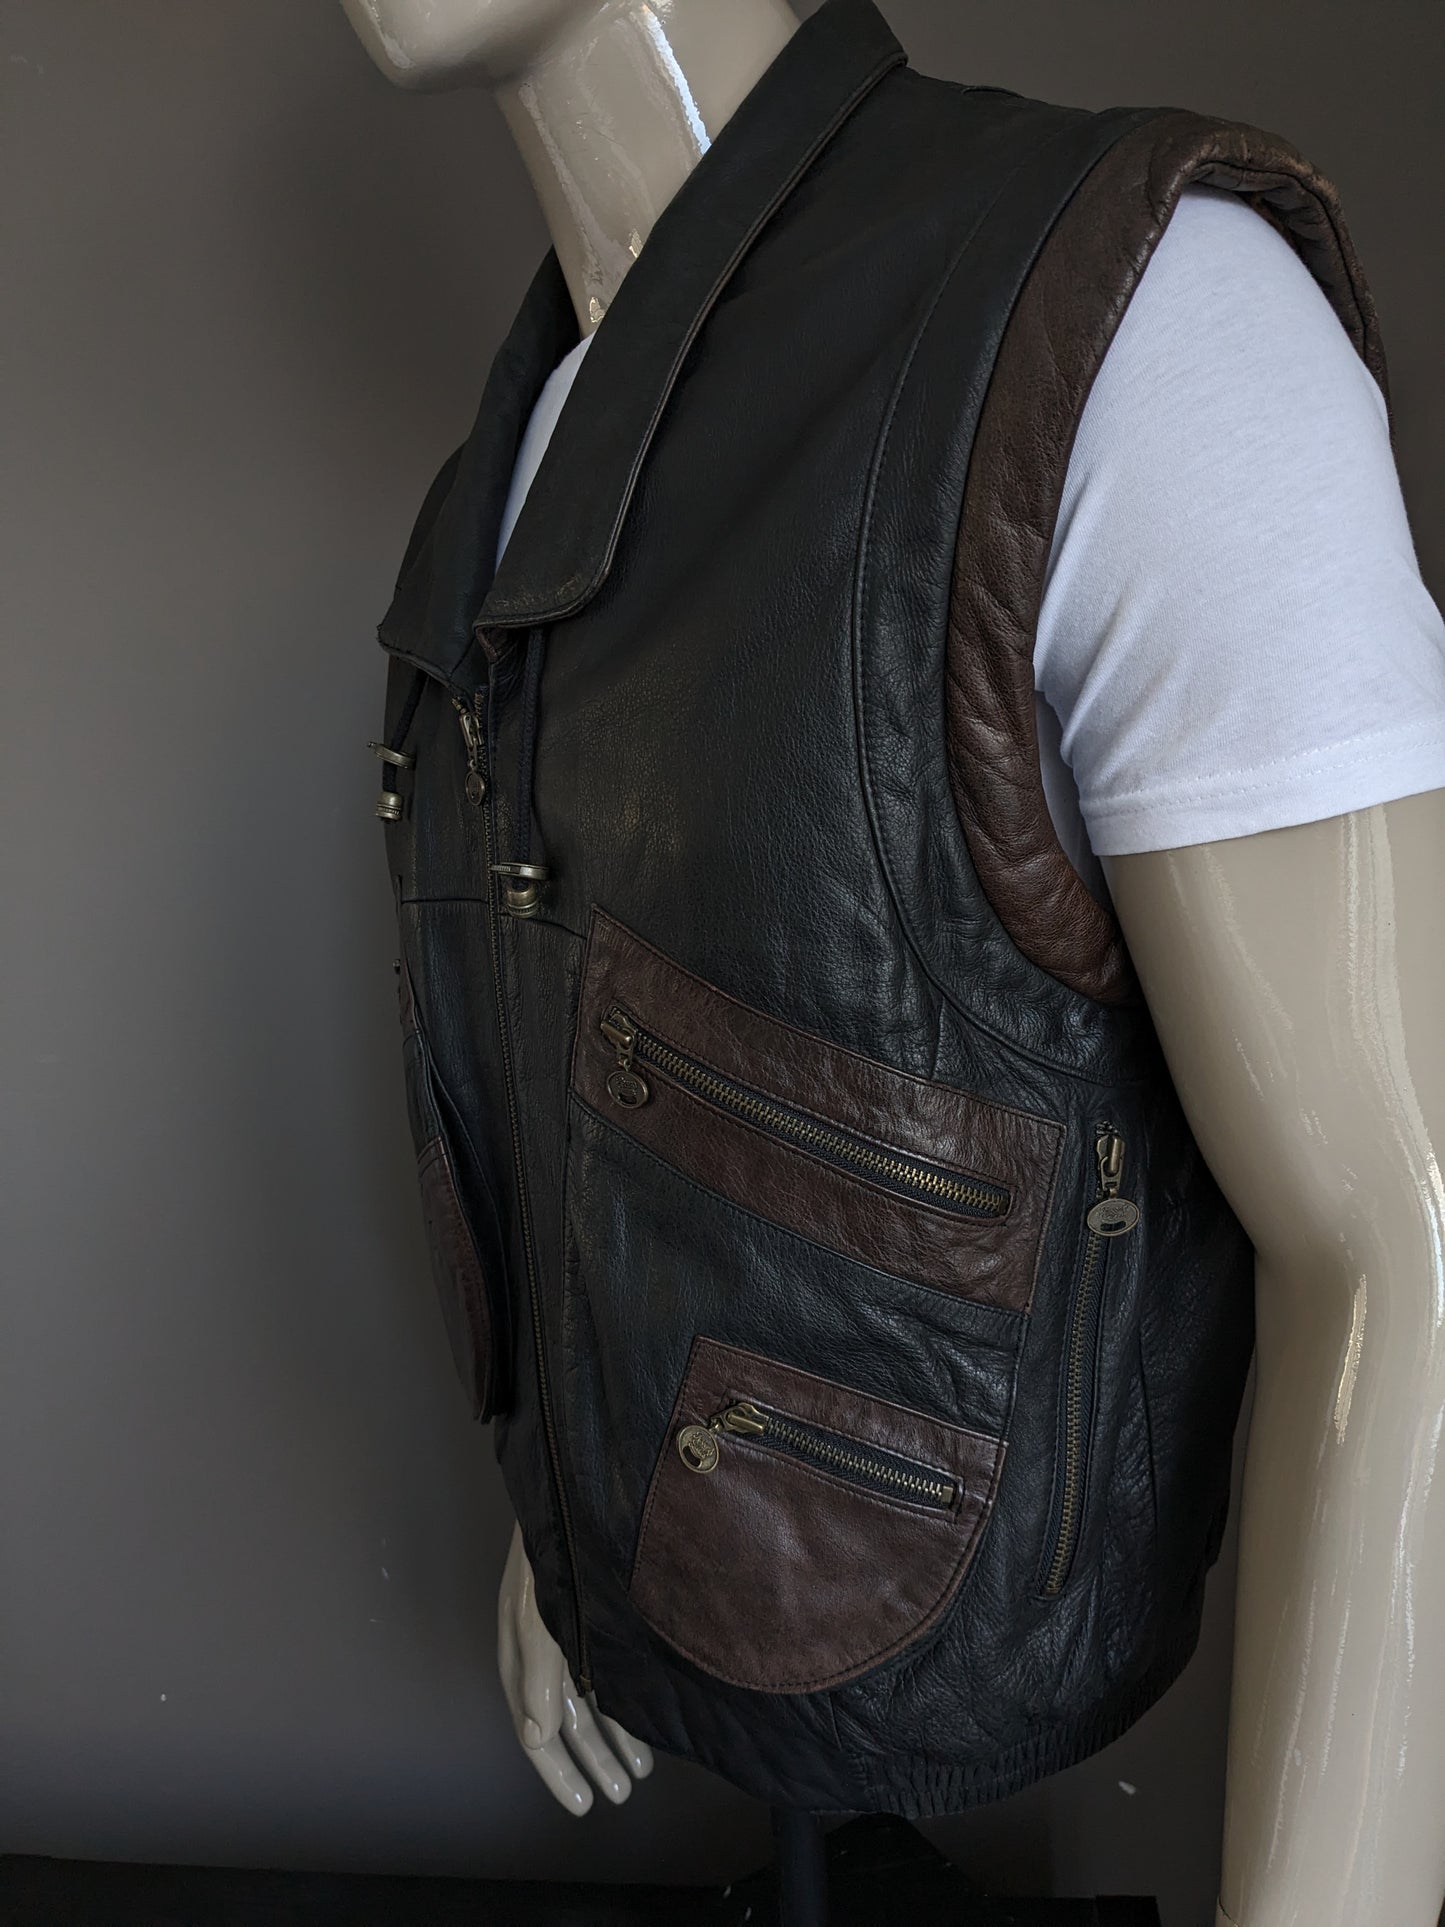 Vintage 80's - 90's Rover & Lakes Learn Body Warmer / Gilet. Lots of bags, 2 inner pockets and light lined. Brown / black. Size XL.